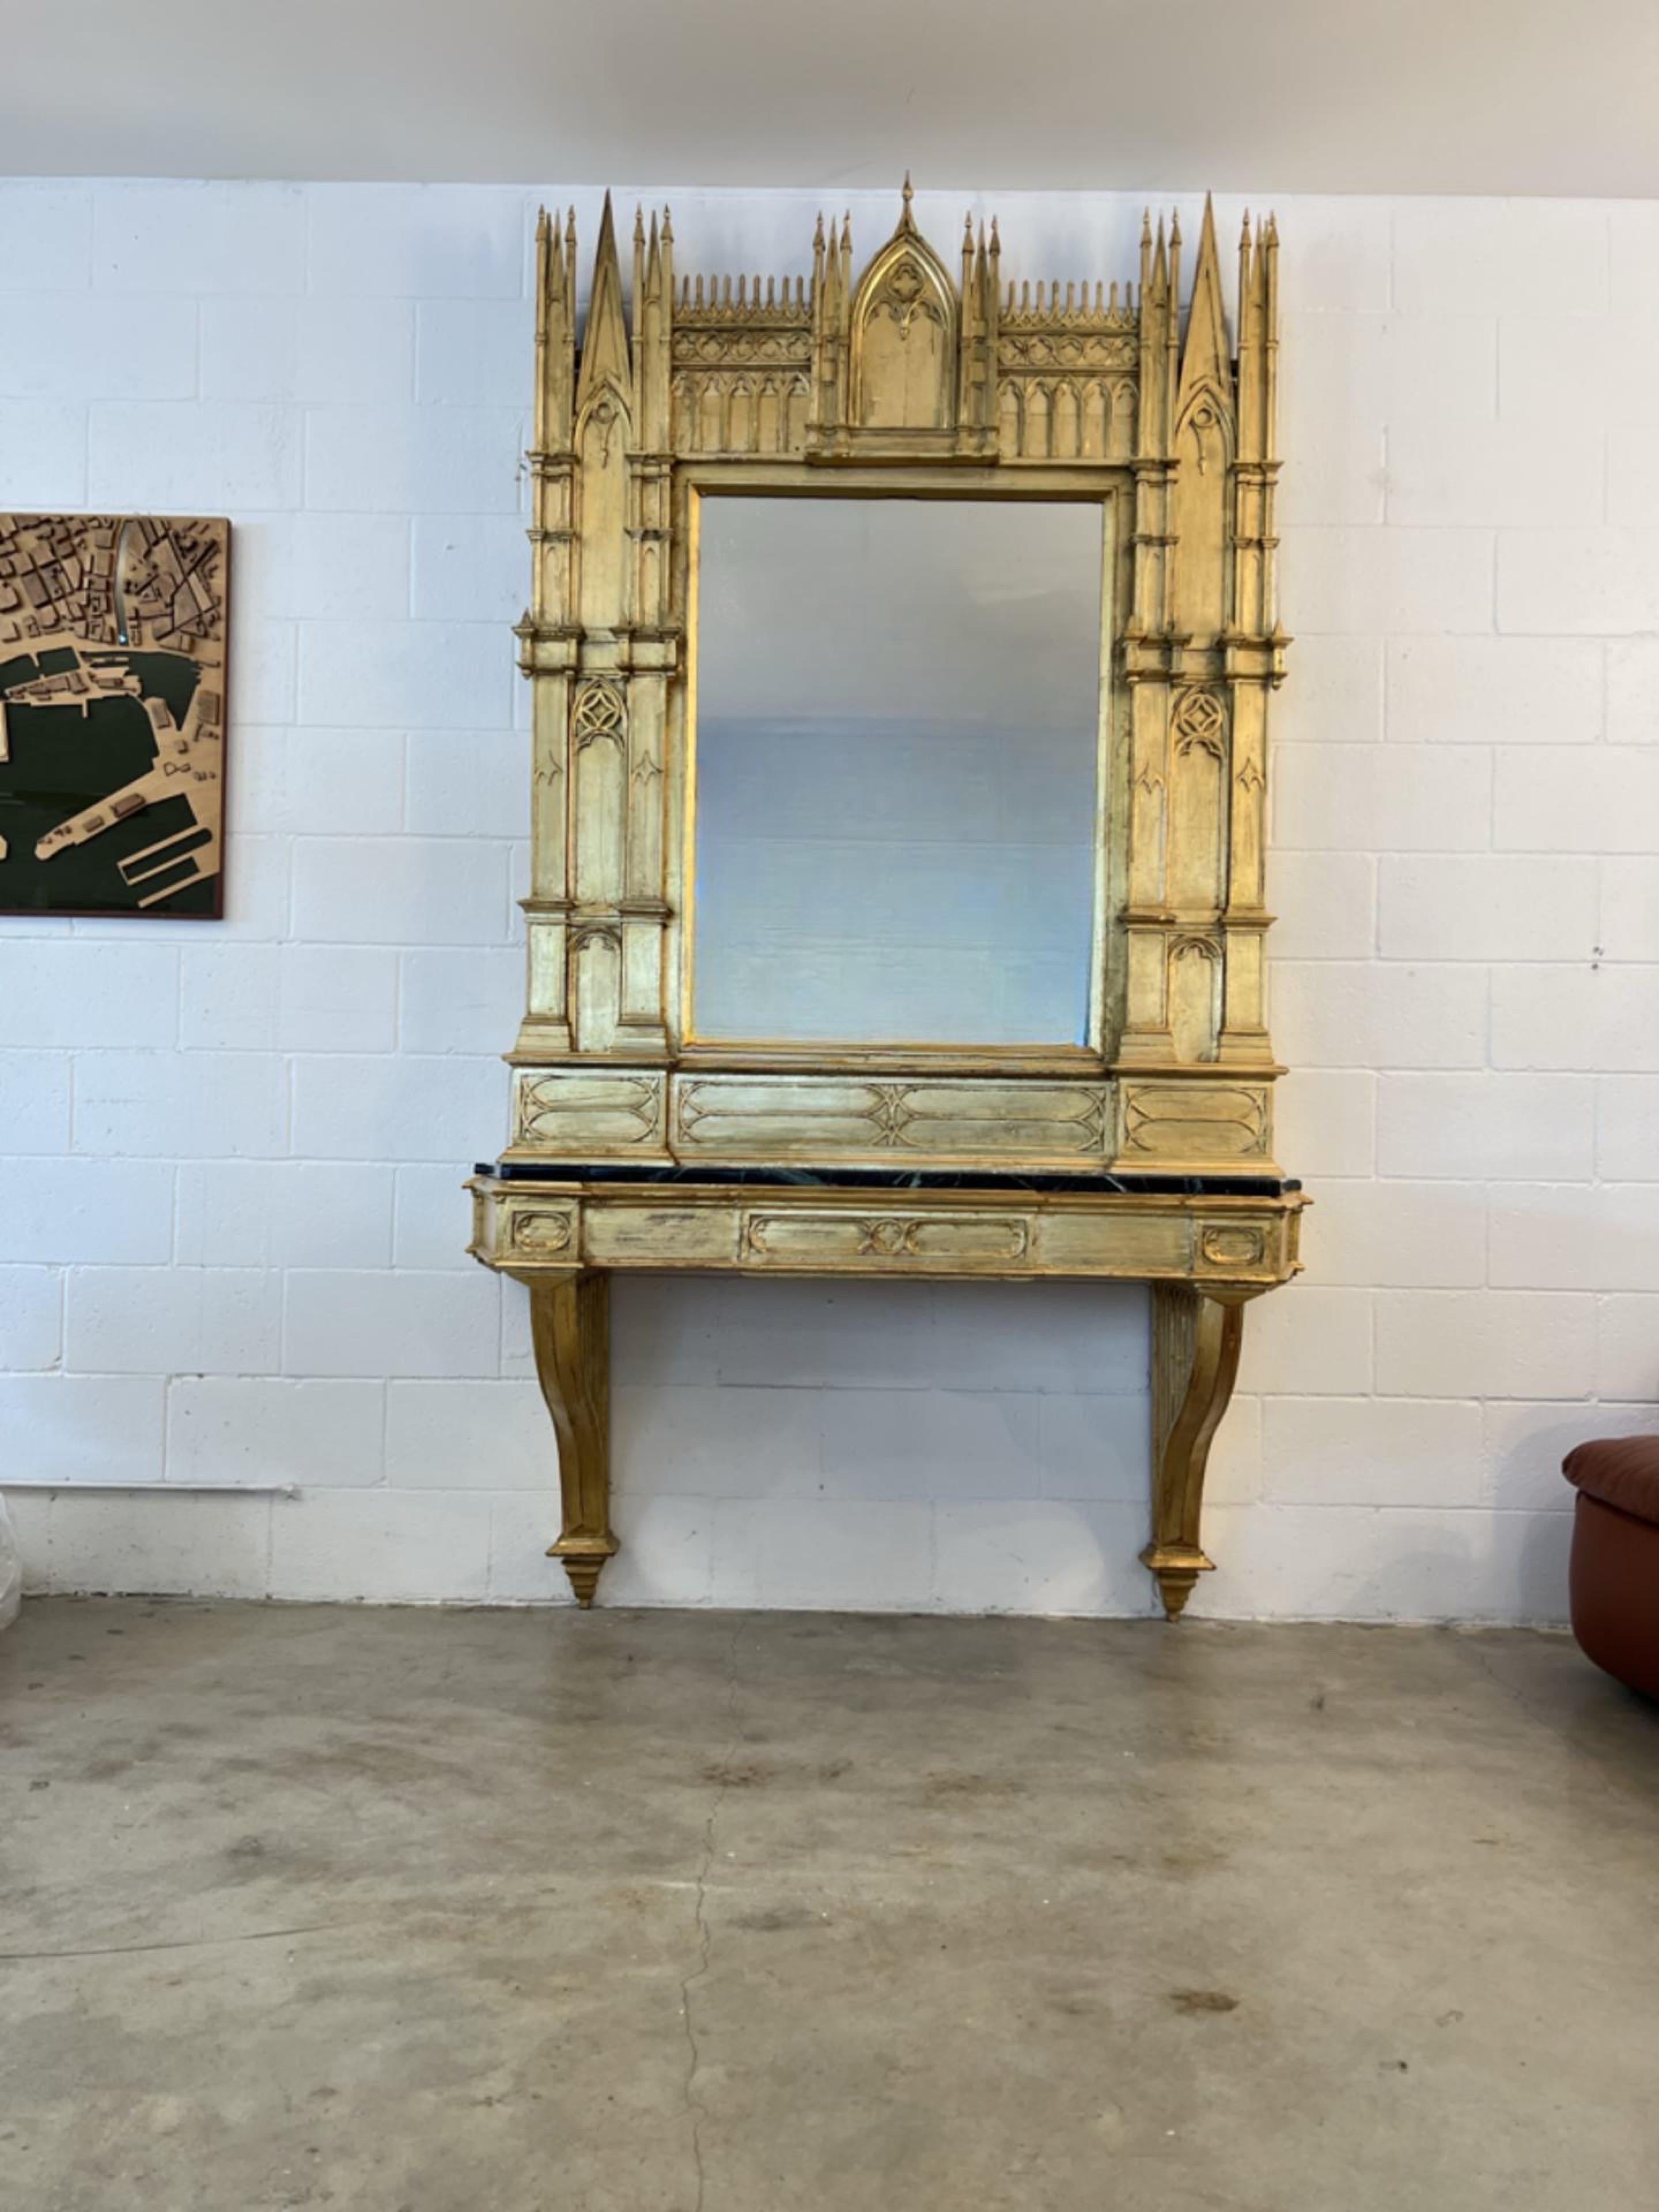 Italian Gothic gold leaf mirror console with black marble top 1920s.
Statement piece completely cover in gold leaf by Paolo Lumini, he restored the all piece giving a a completely fresh look and a new life to such an incredible sculptural mirror